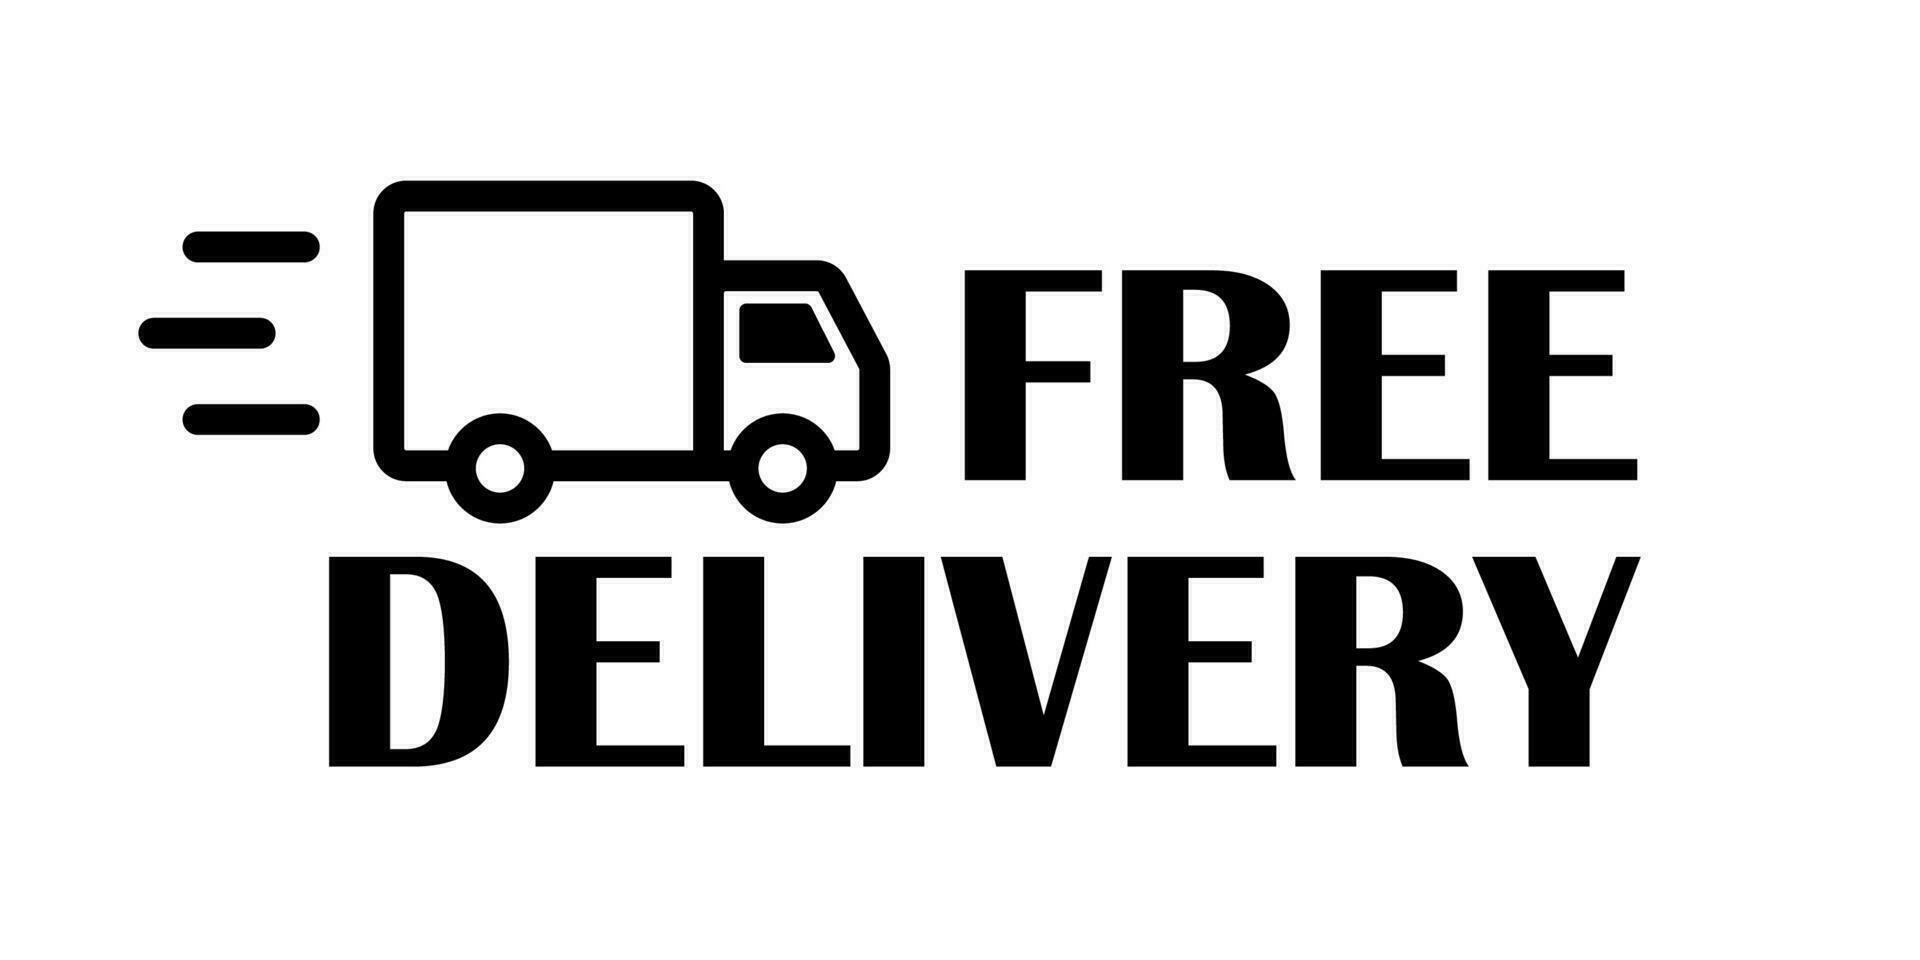 Free shipping delivery service text with badge. Fast time delivery order . Quick shipping delivery icon vector